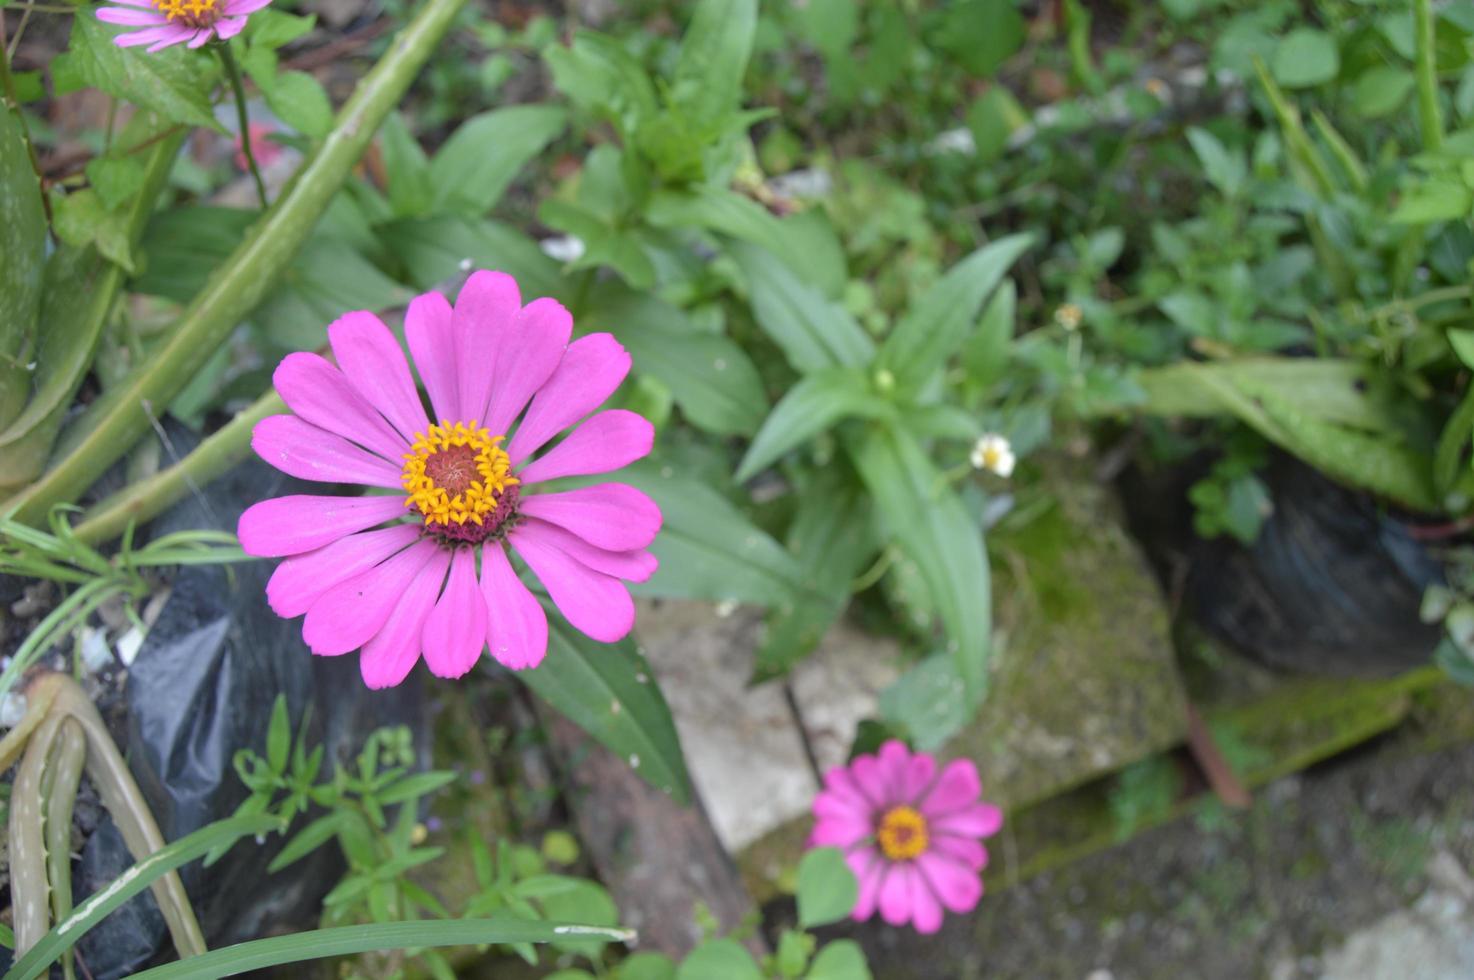 flowers blooming beautifully in the garden photo